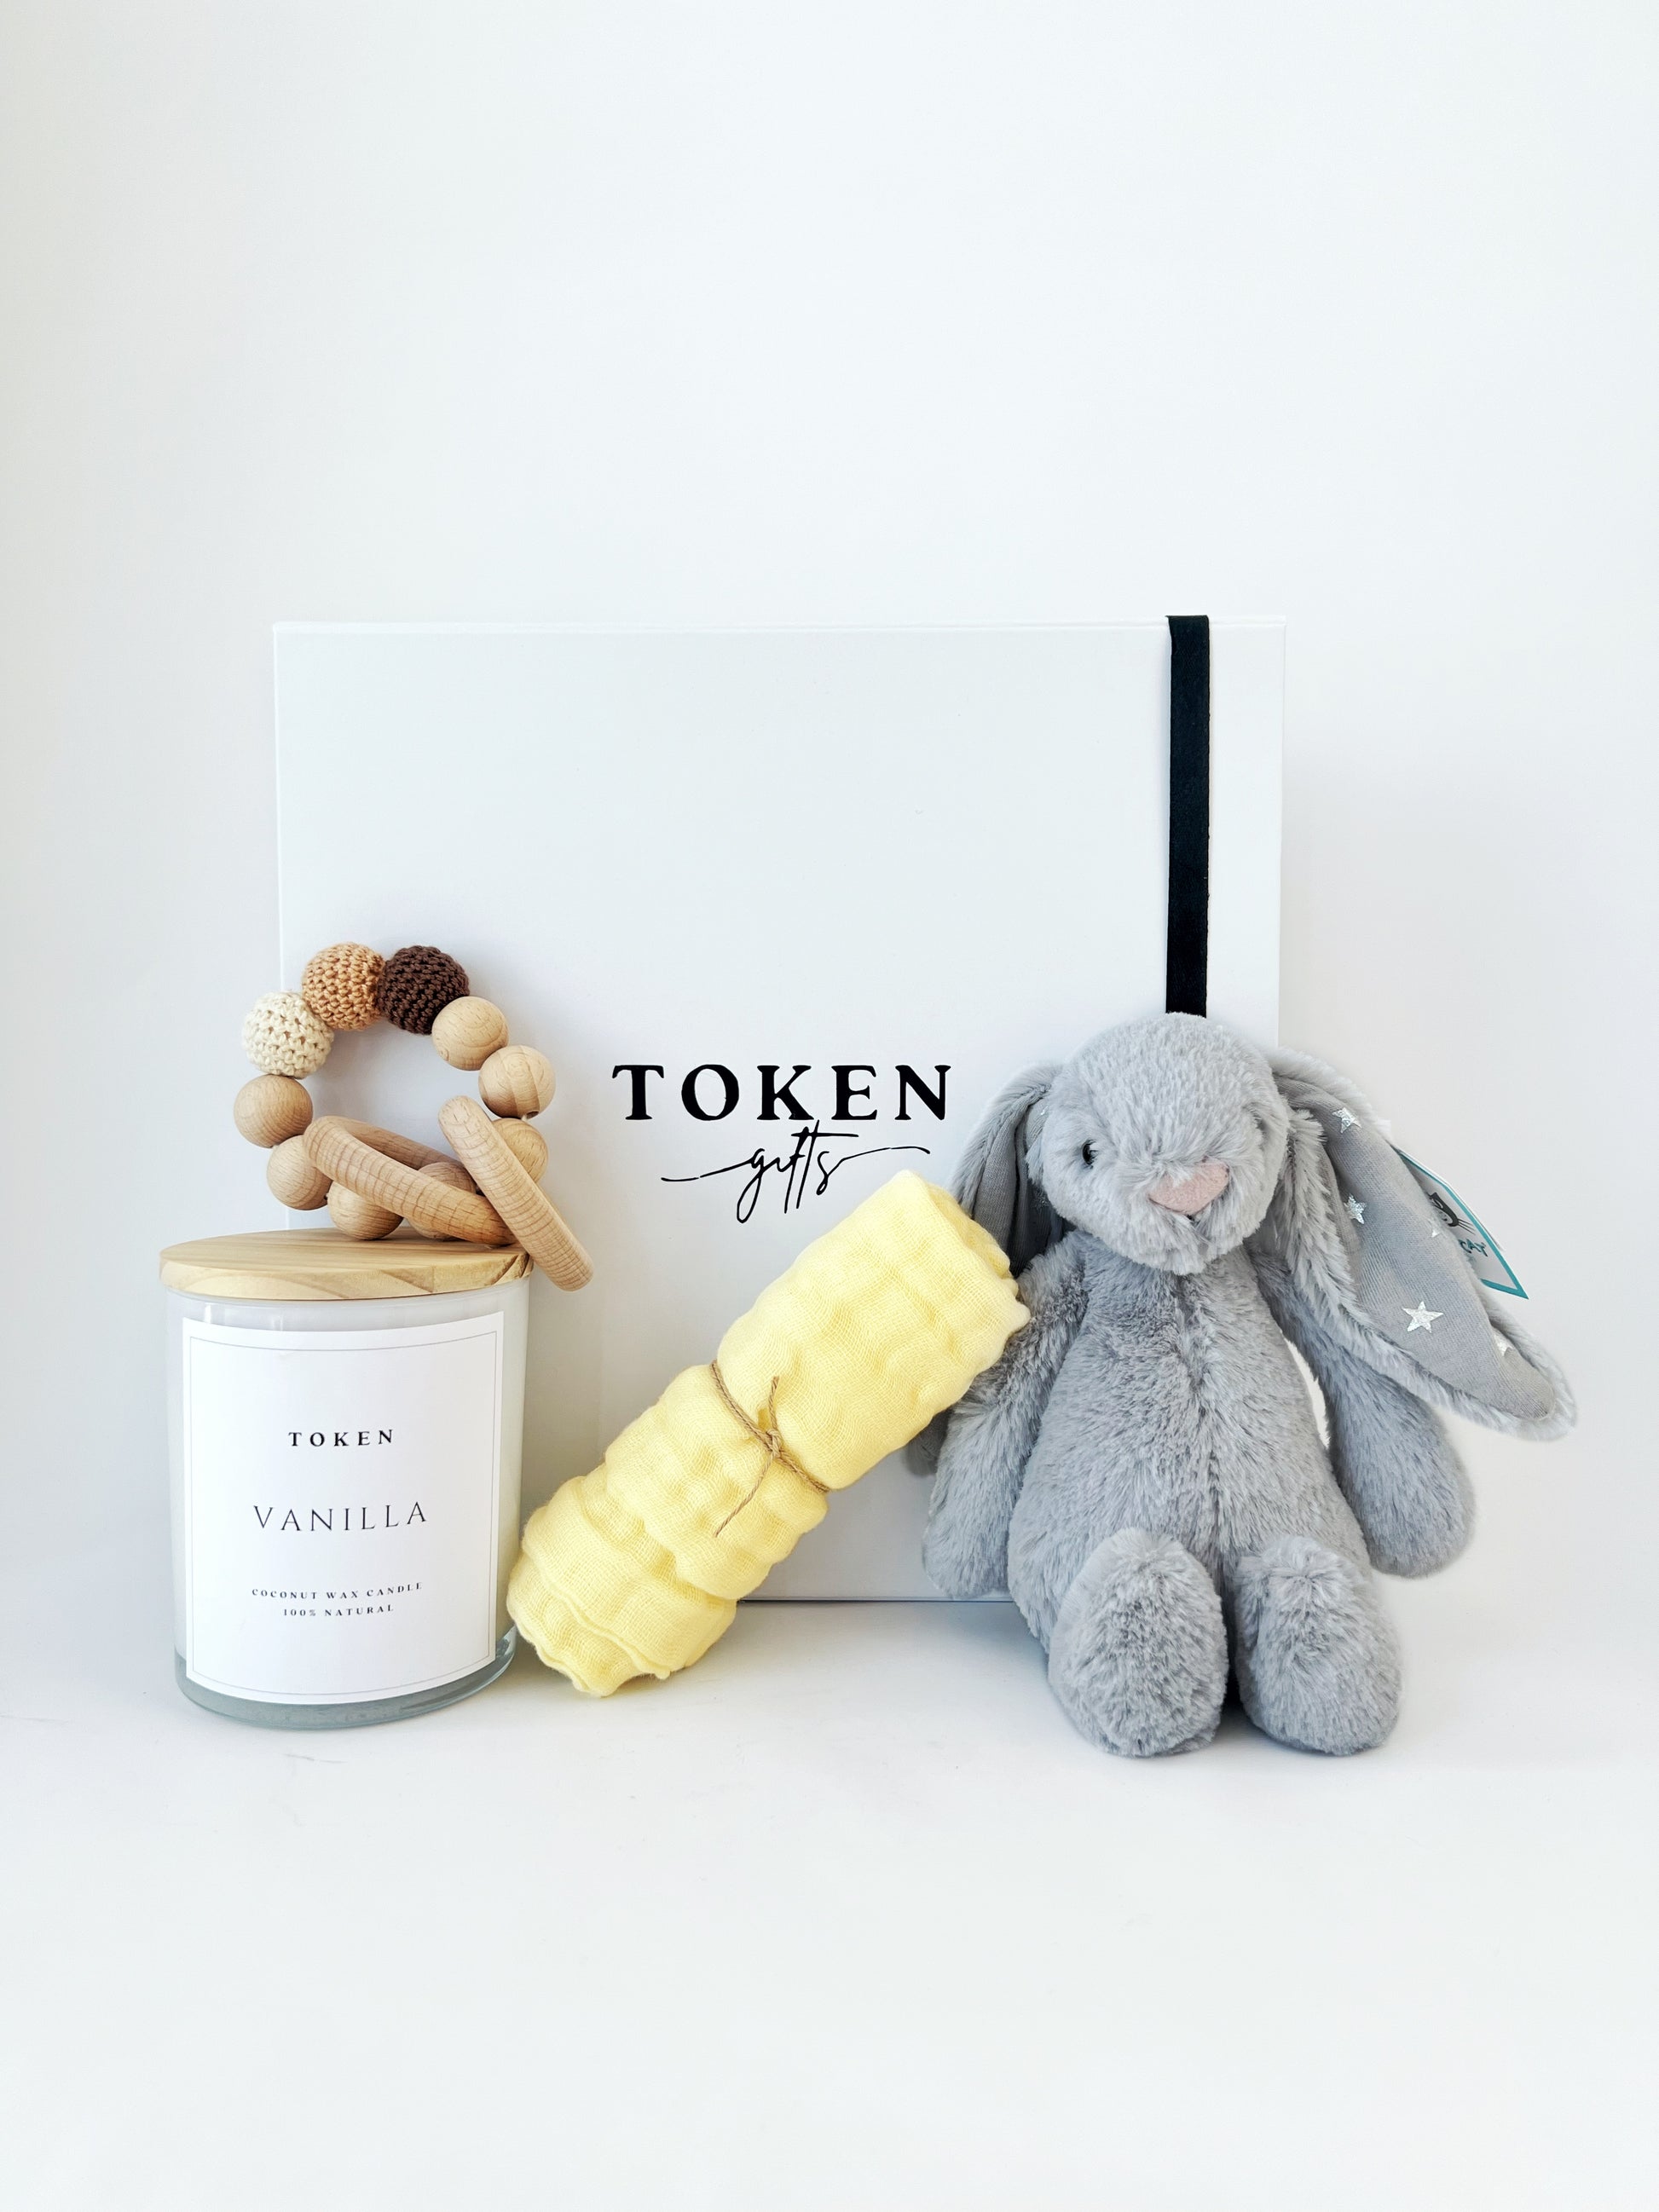 Small Baby Shower Keepsake Gift Box. Includes: Jellycat Bunny, Candle, Cotton Facecloth, Wooden Rattle. 